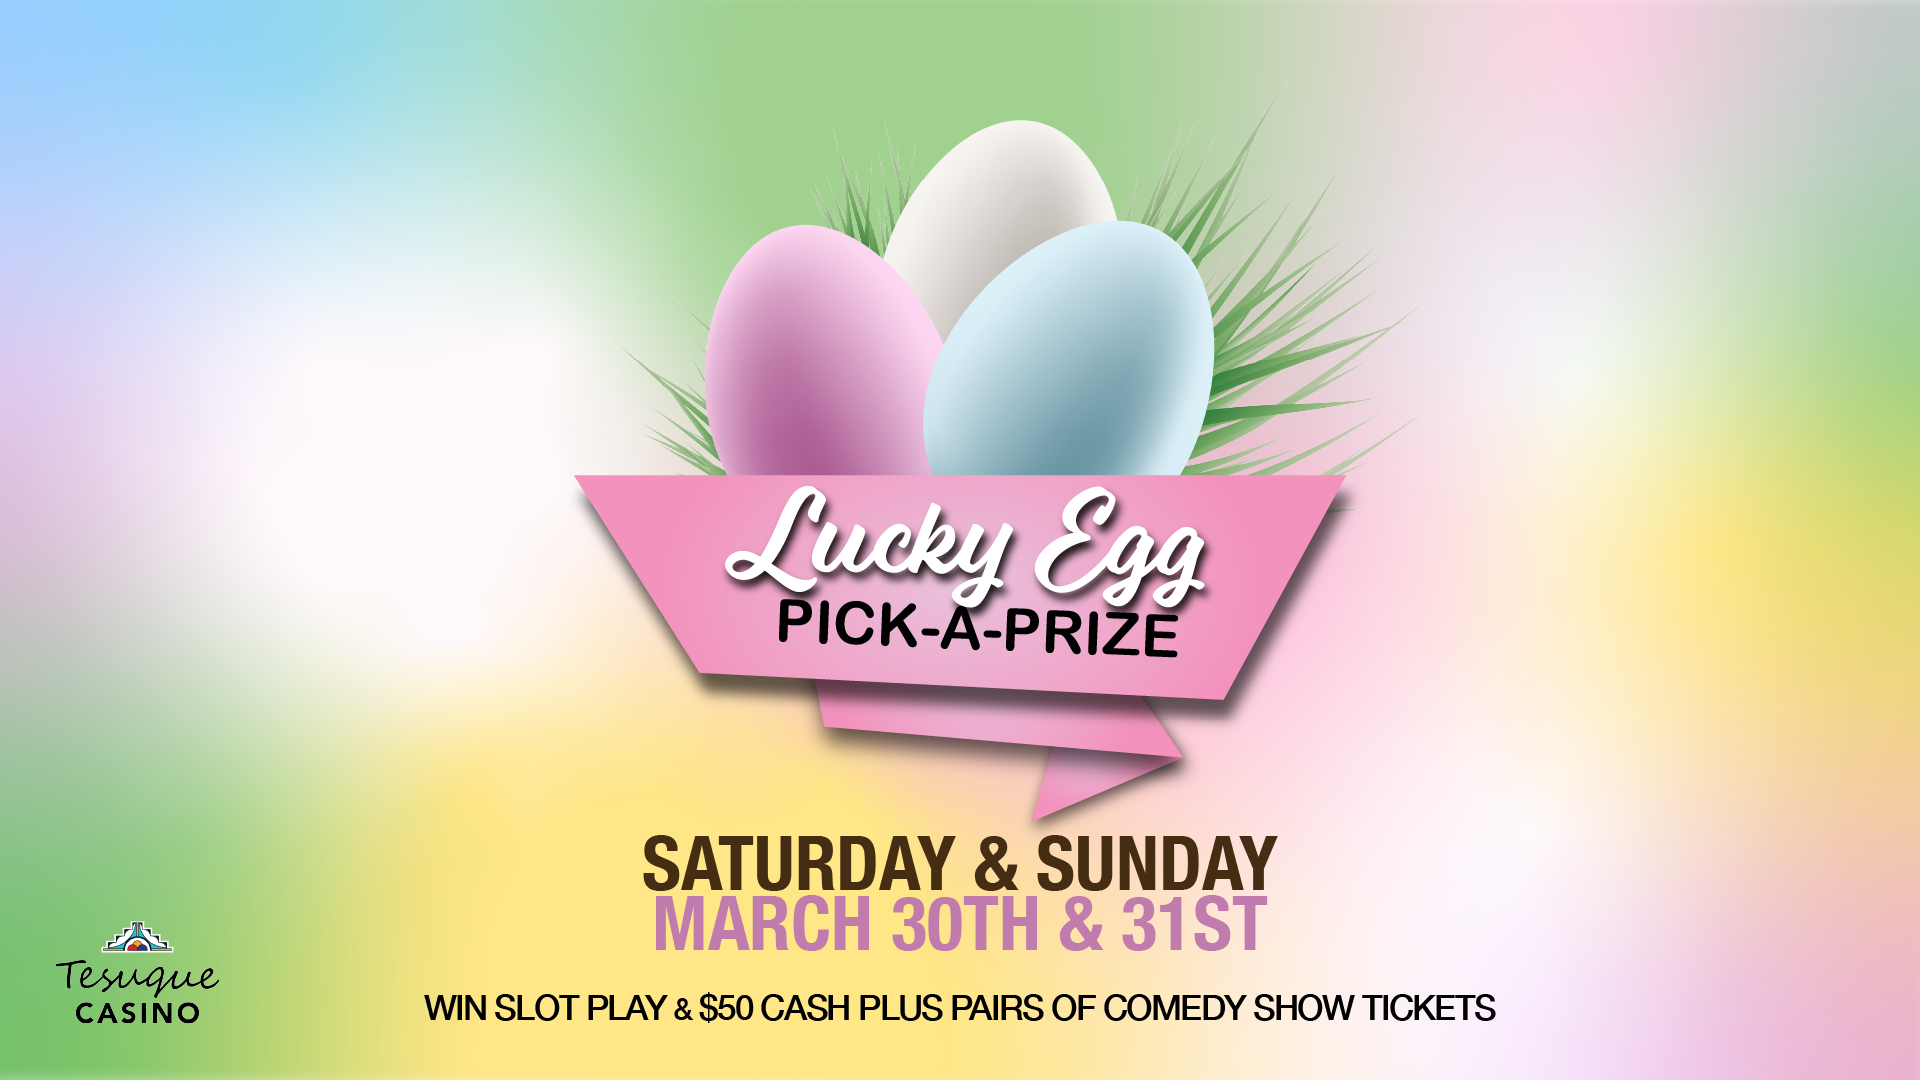 Lucky Egg pick-a-prize: Saturday and Sunday March 30th and 31st. Win slot play & $50 cash plus pairs of comedy show tickets